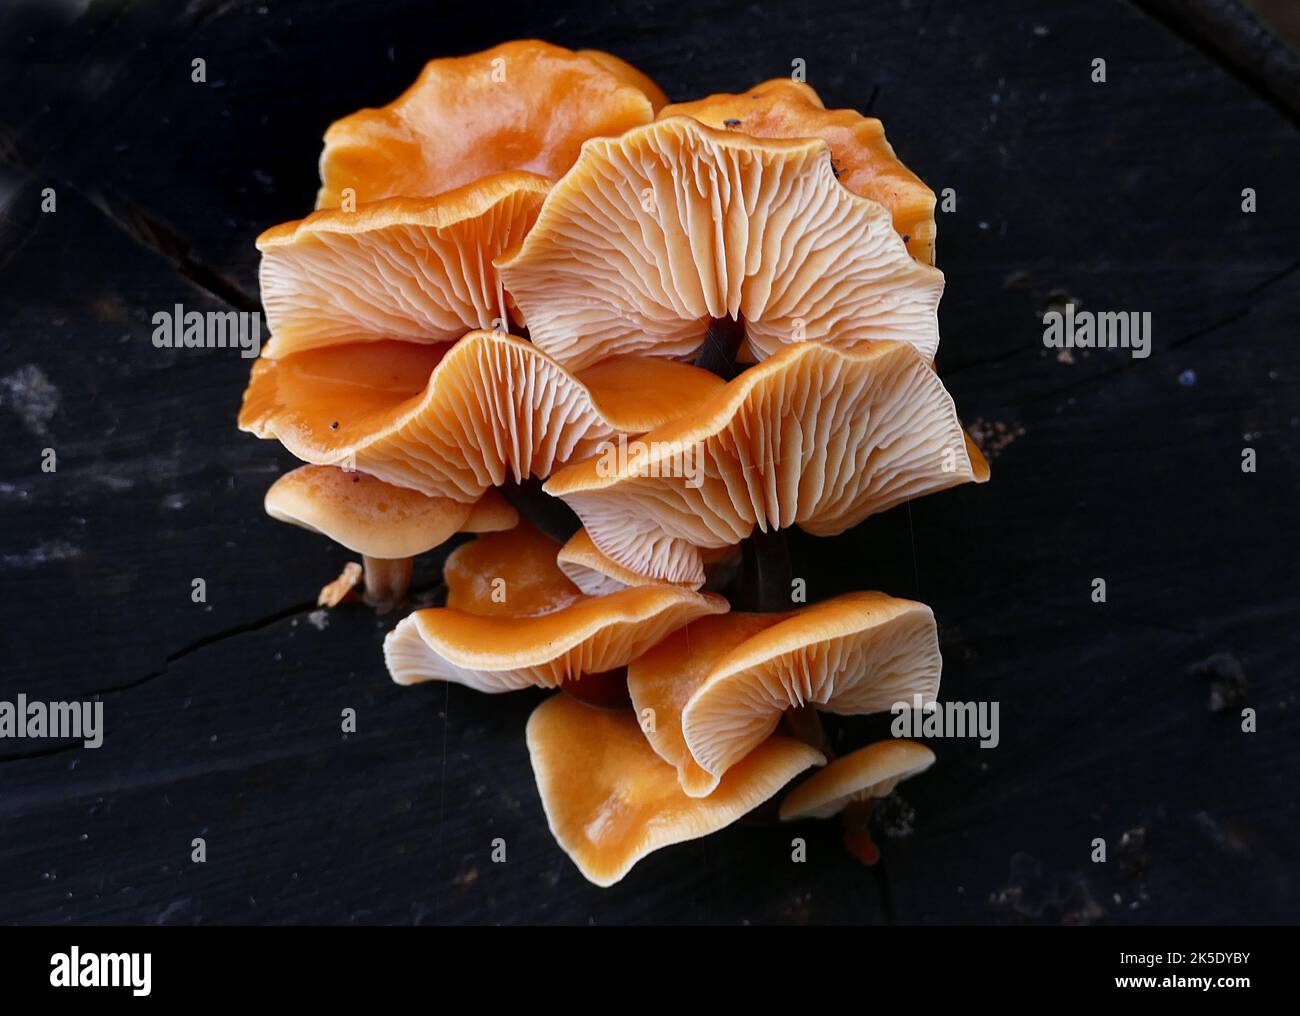 Flammulina velutipes is a species of agaric (gilled mushroom) in the family Physalacriaceae. In the UK, it has been given the recommended English name of velvet shank. Here photographed in woodland in New Zealand, where mycologists there consider F. velutipes as a distinct variety. Credit: BSpragg Stock Photo